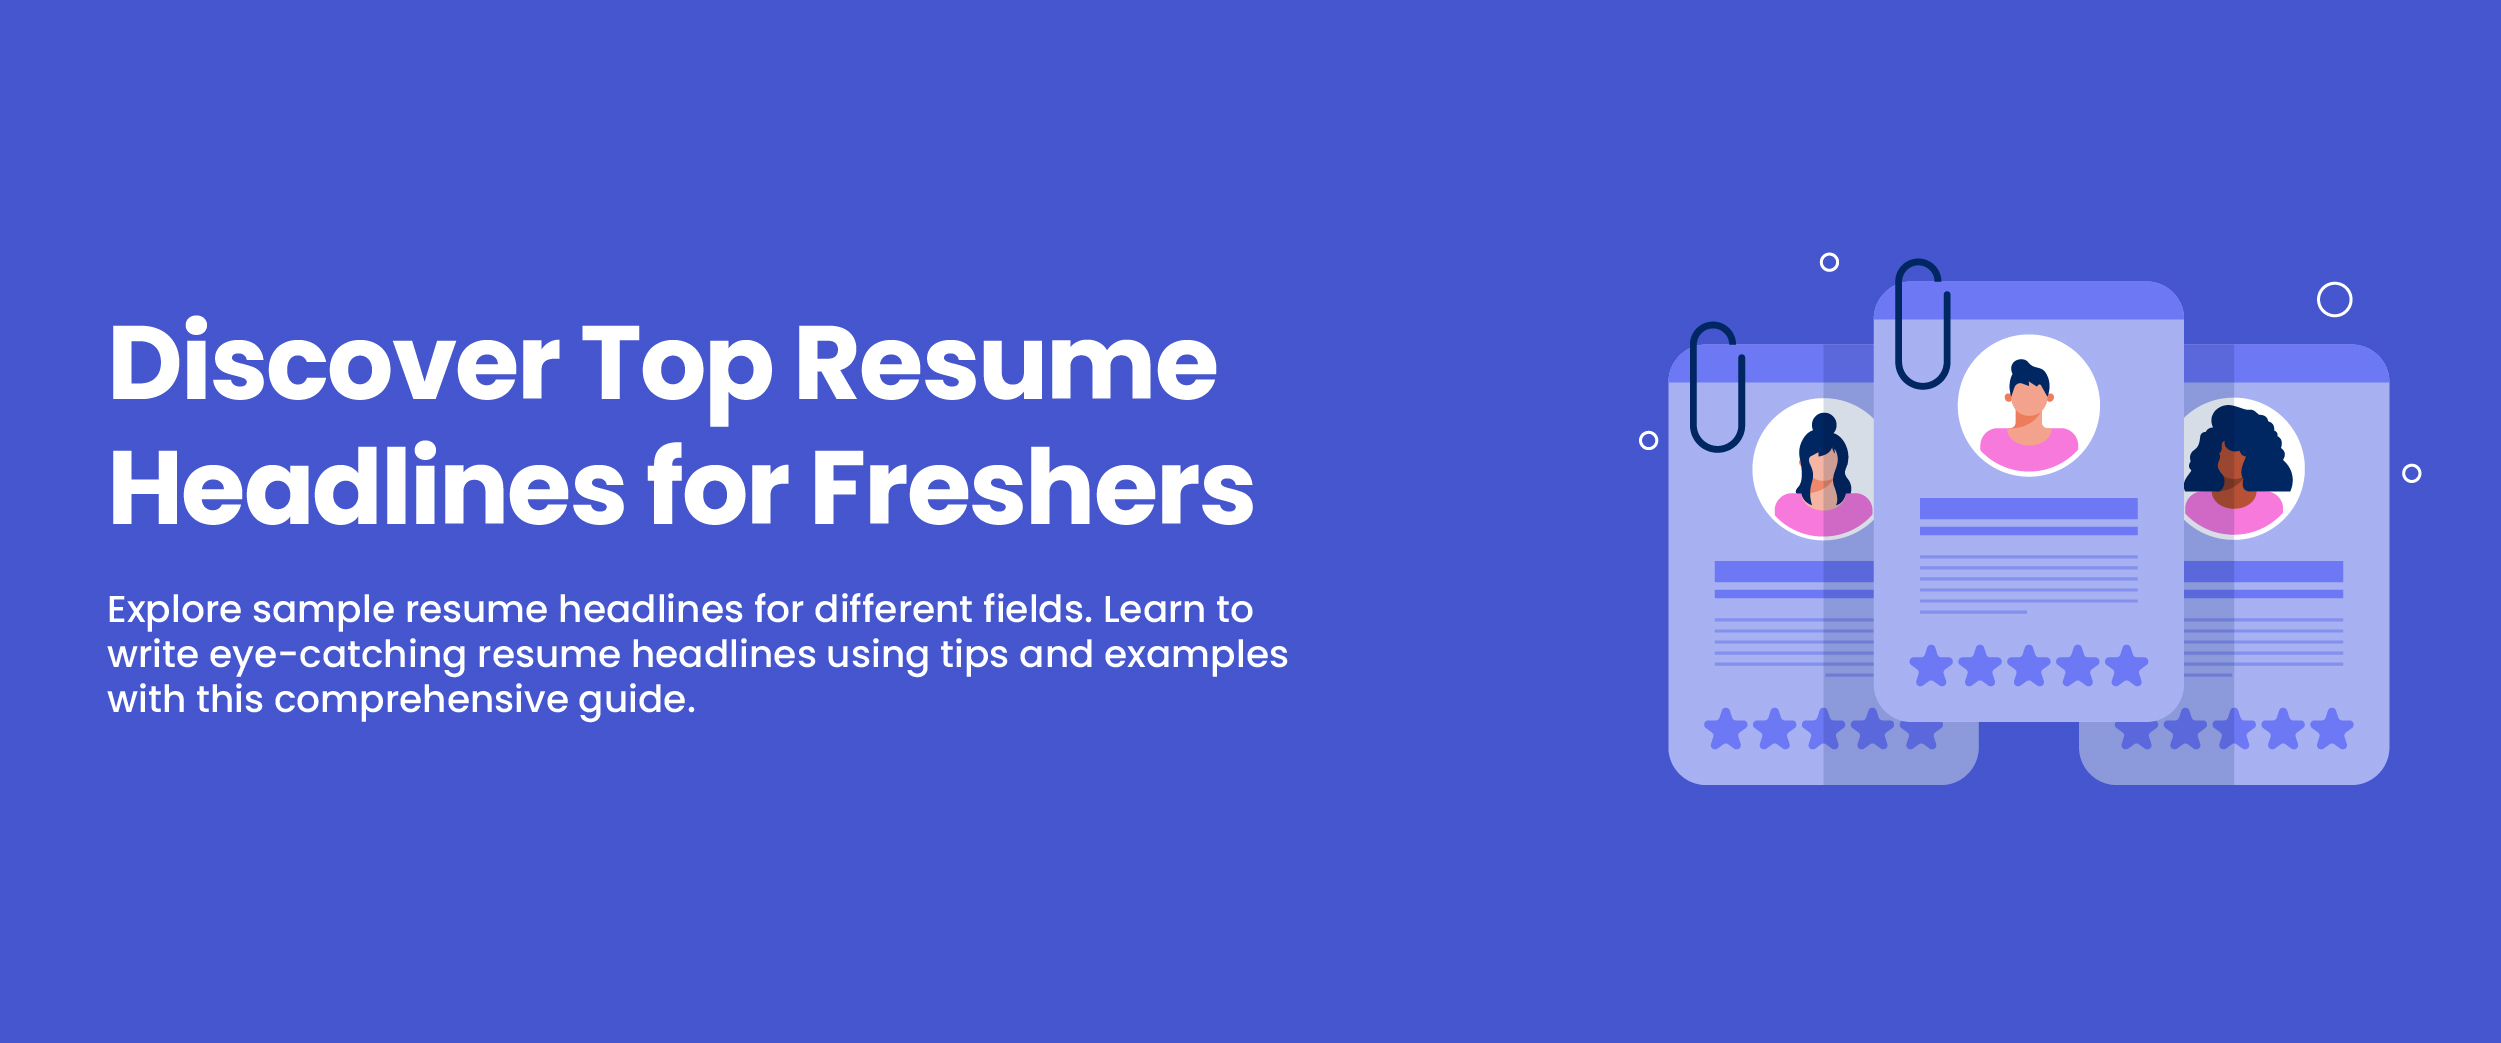 Discover Top Resume Headlines for Freshers